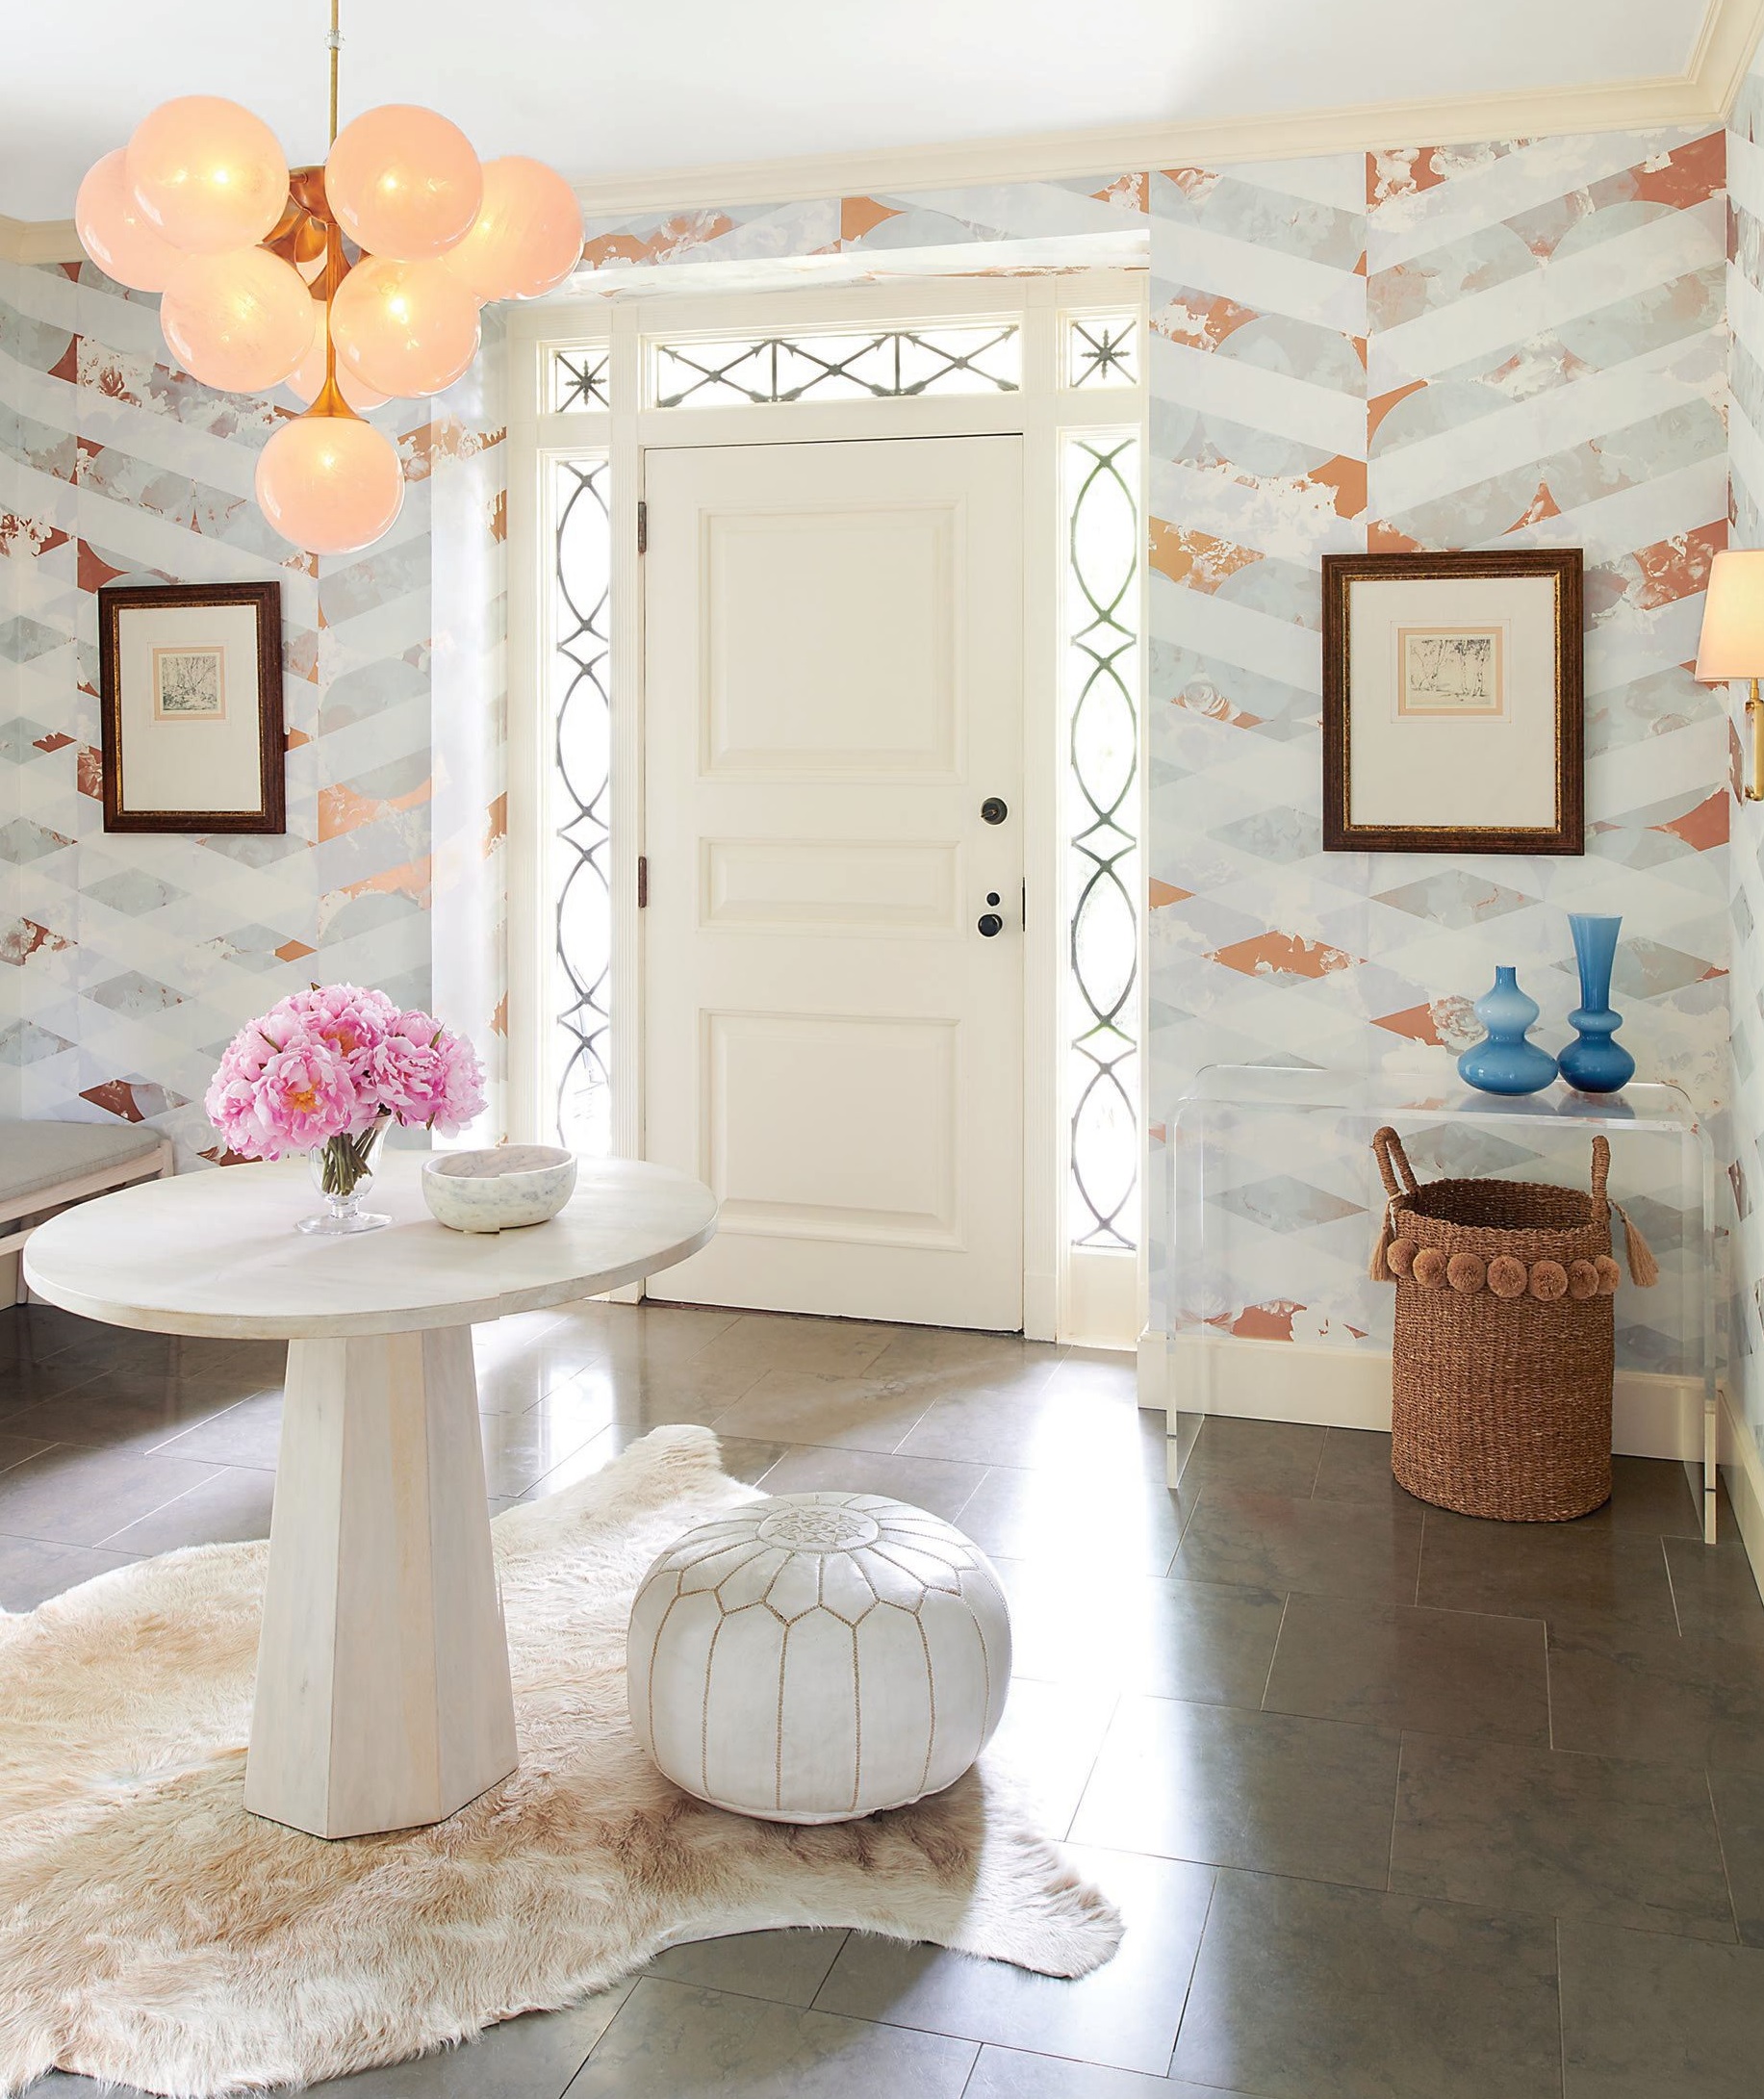 In the entry, wallpaper from Flat Vernacular and a center table from Wisteria. Photographed by Rebecca McAlpin